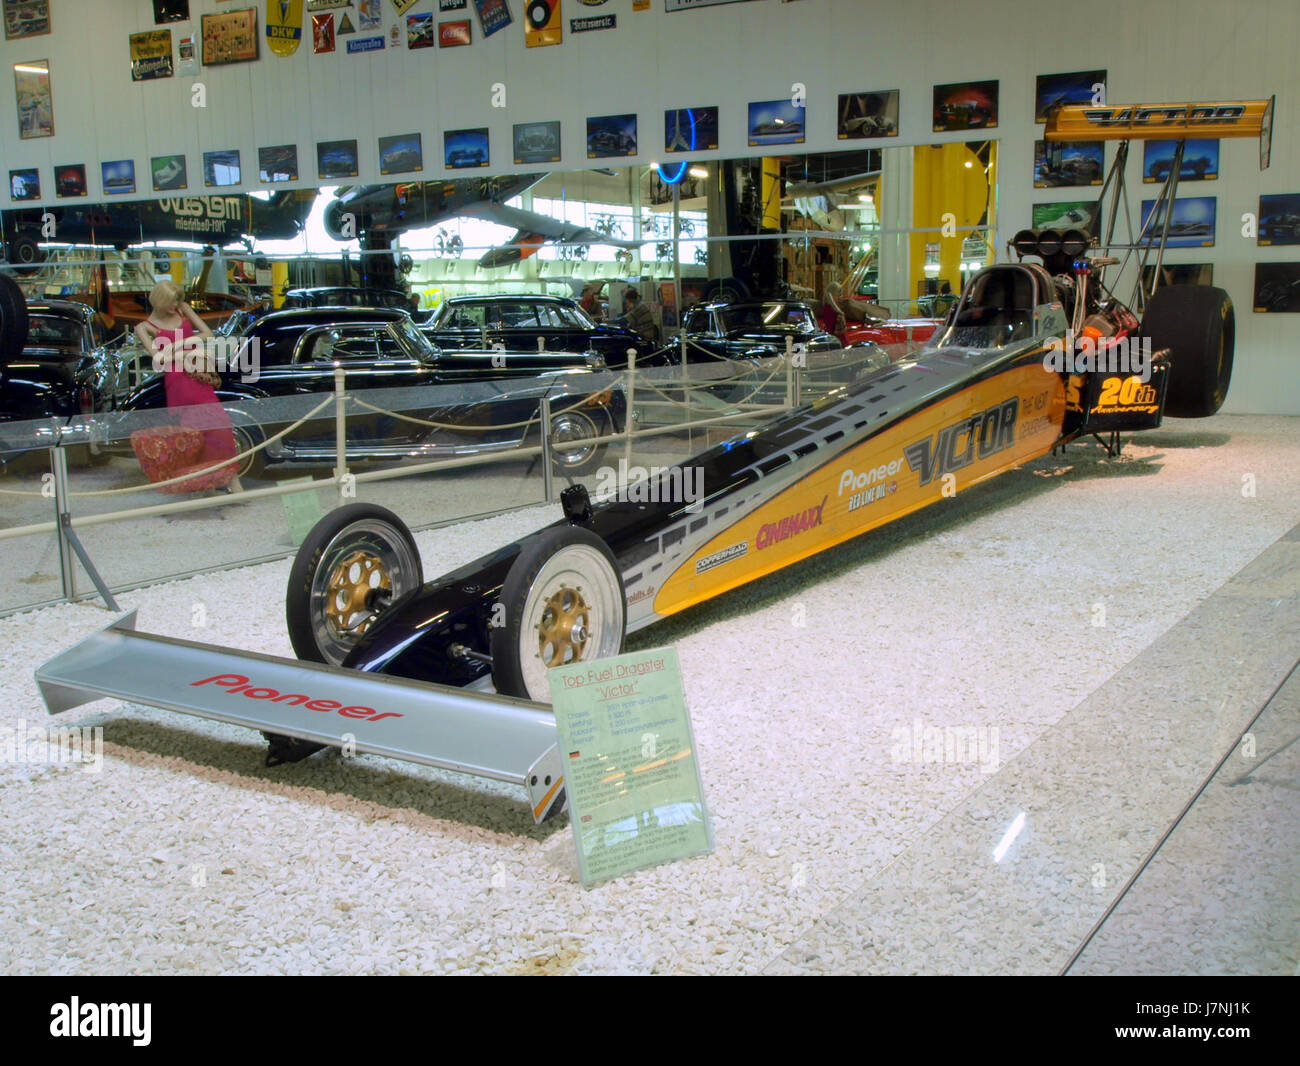 2001 Hadman Chassis, Top Fuel Dragster 'Victor' pic1 Stock Photo